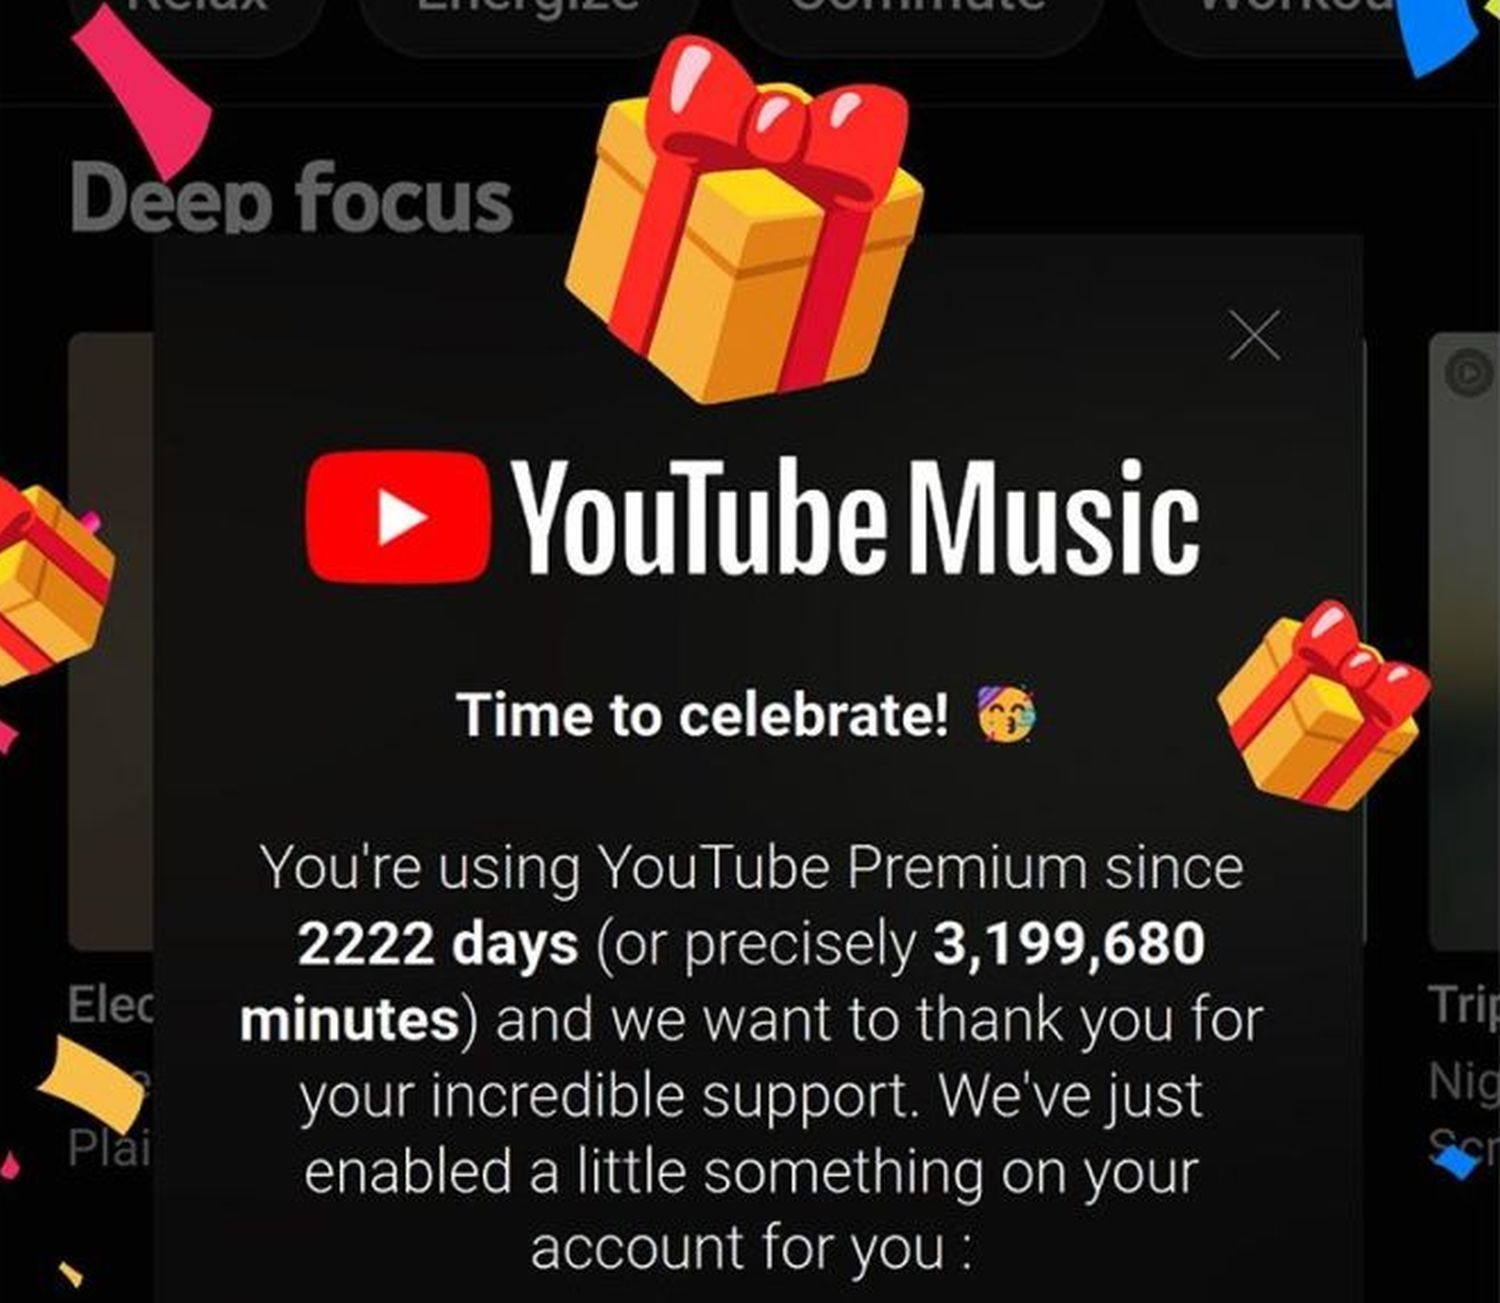 youtube music free covers for 12 months